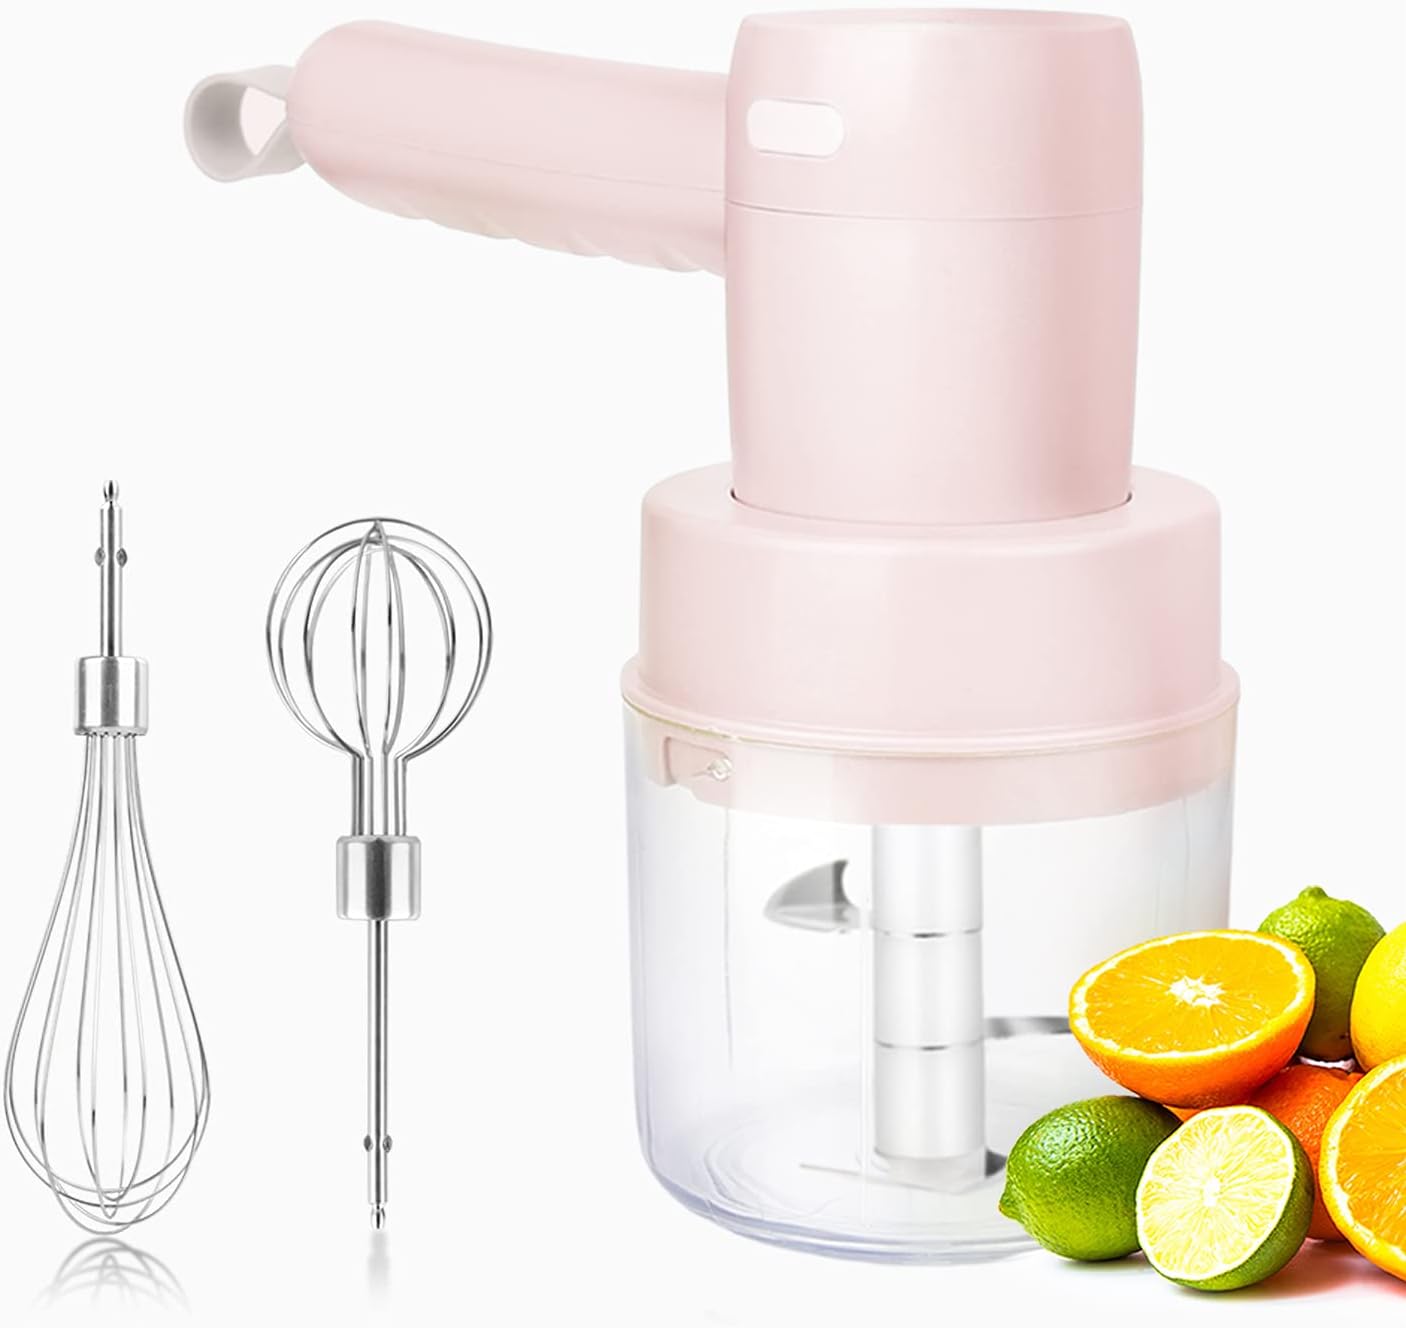 Electric Hand Mixer with Garlic Chopper，3 IN 1 with 5 Speed Cordless Handheld Mixer (Pink)